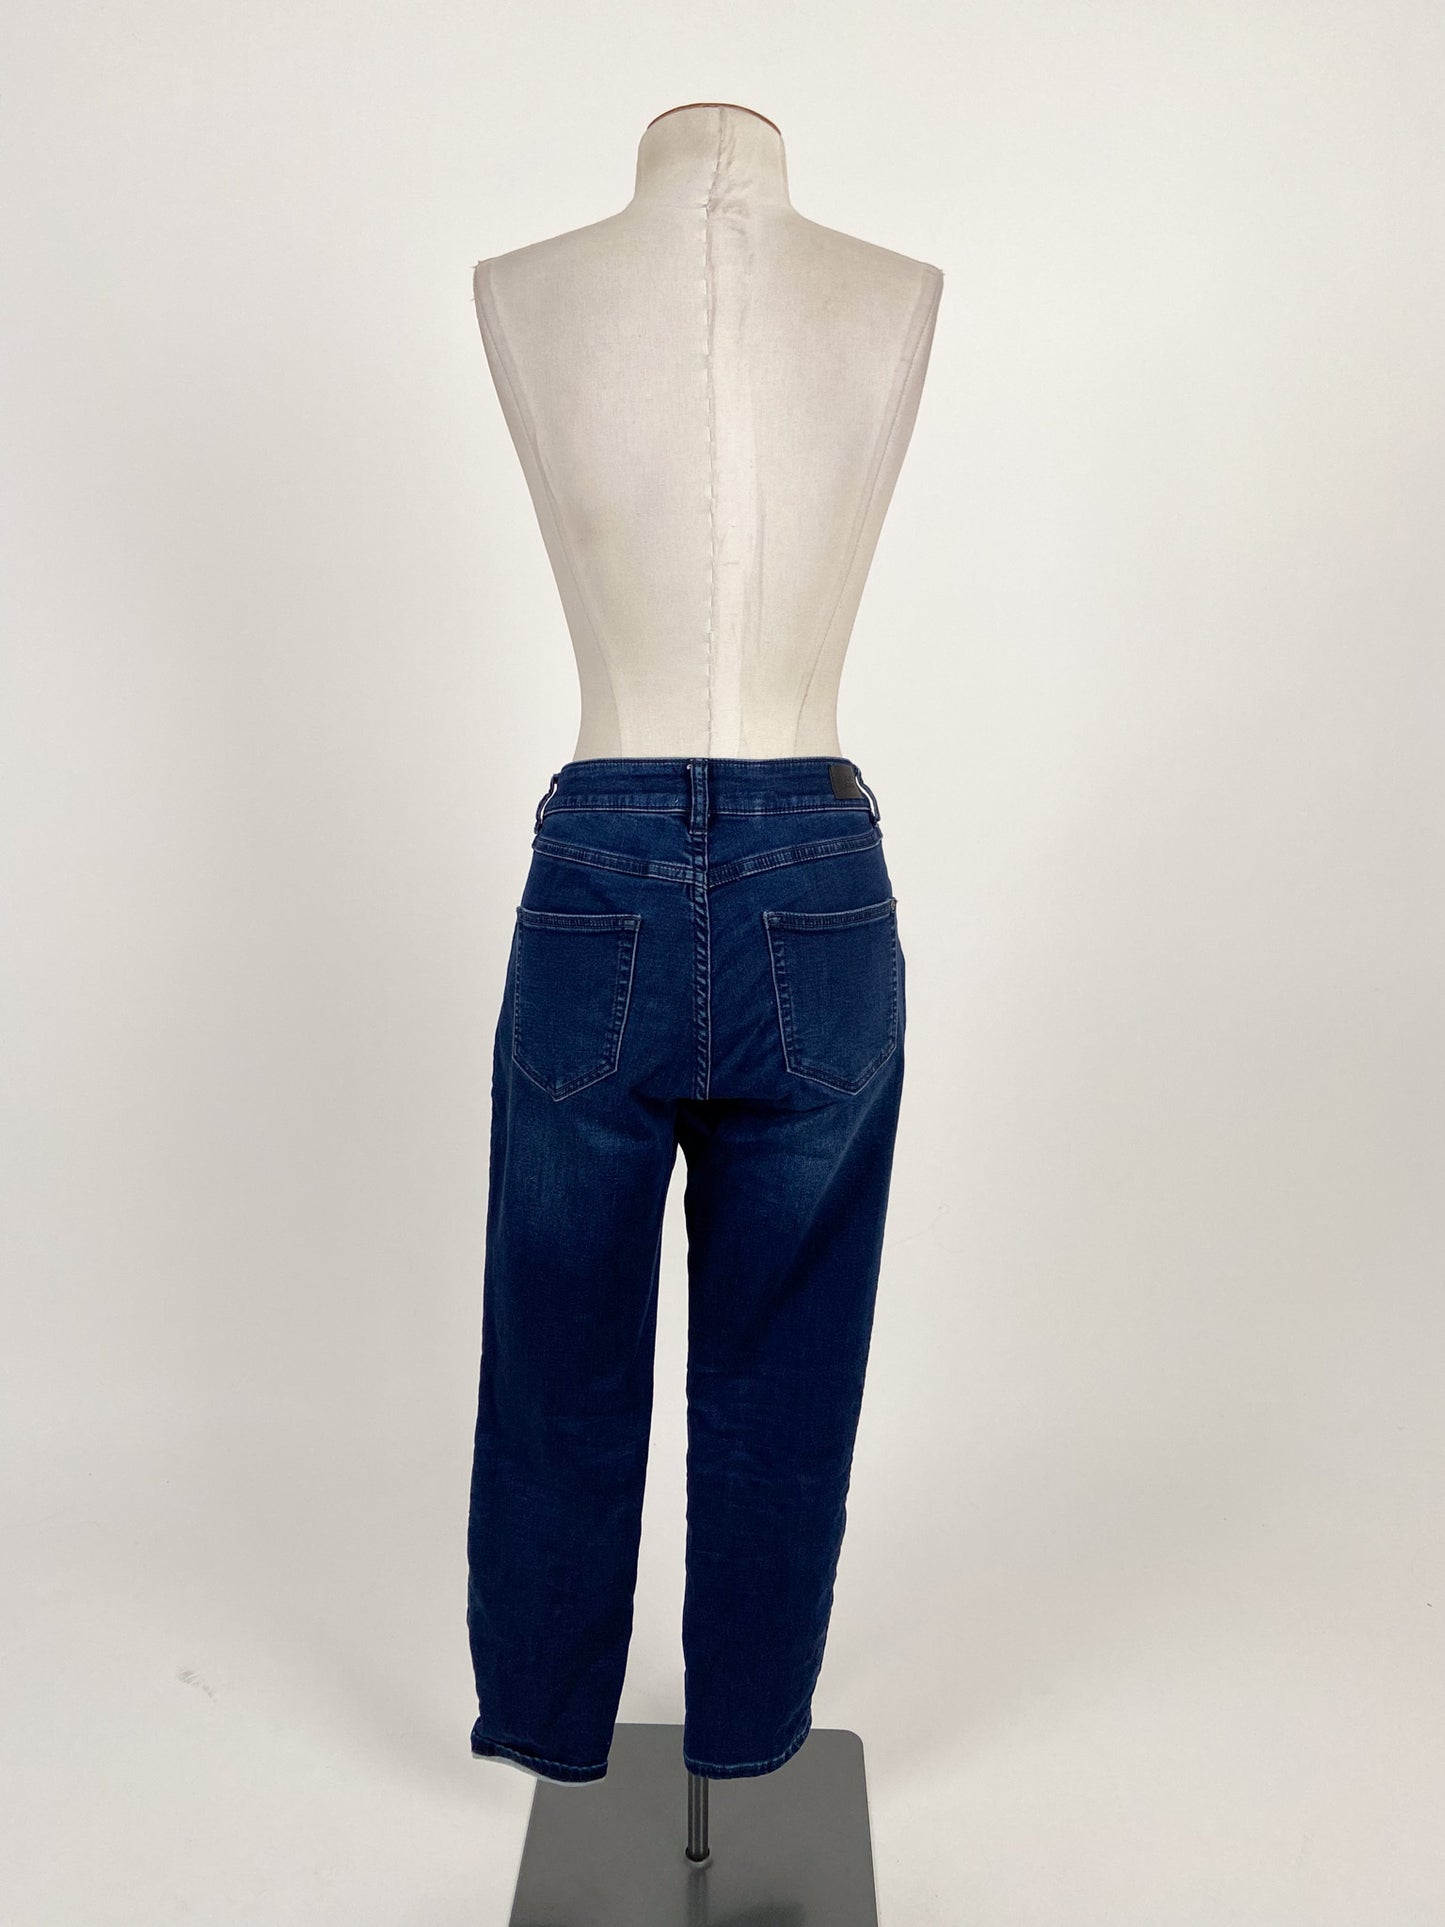 Just Jeans | Blue Casual Jeans | Size 8